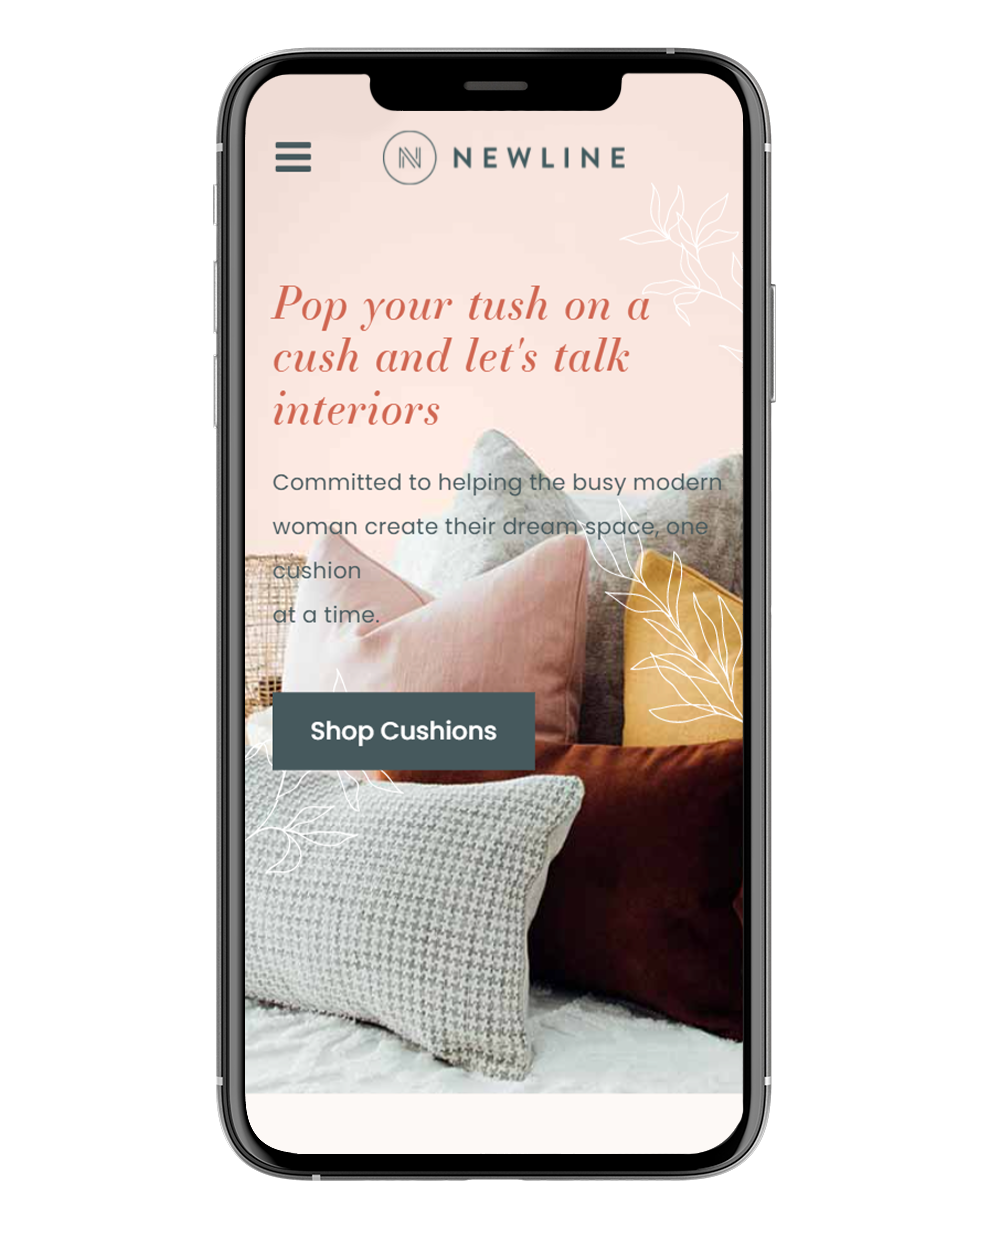 Mobile View Mockup of Newline eCommerce